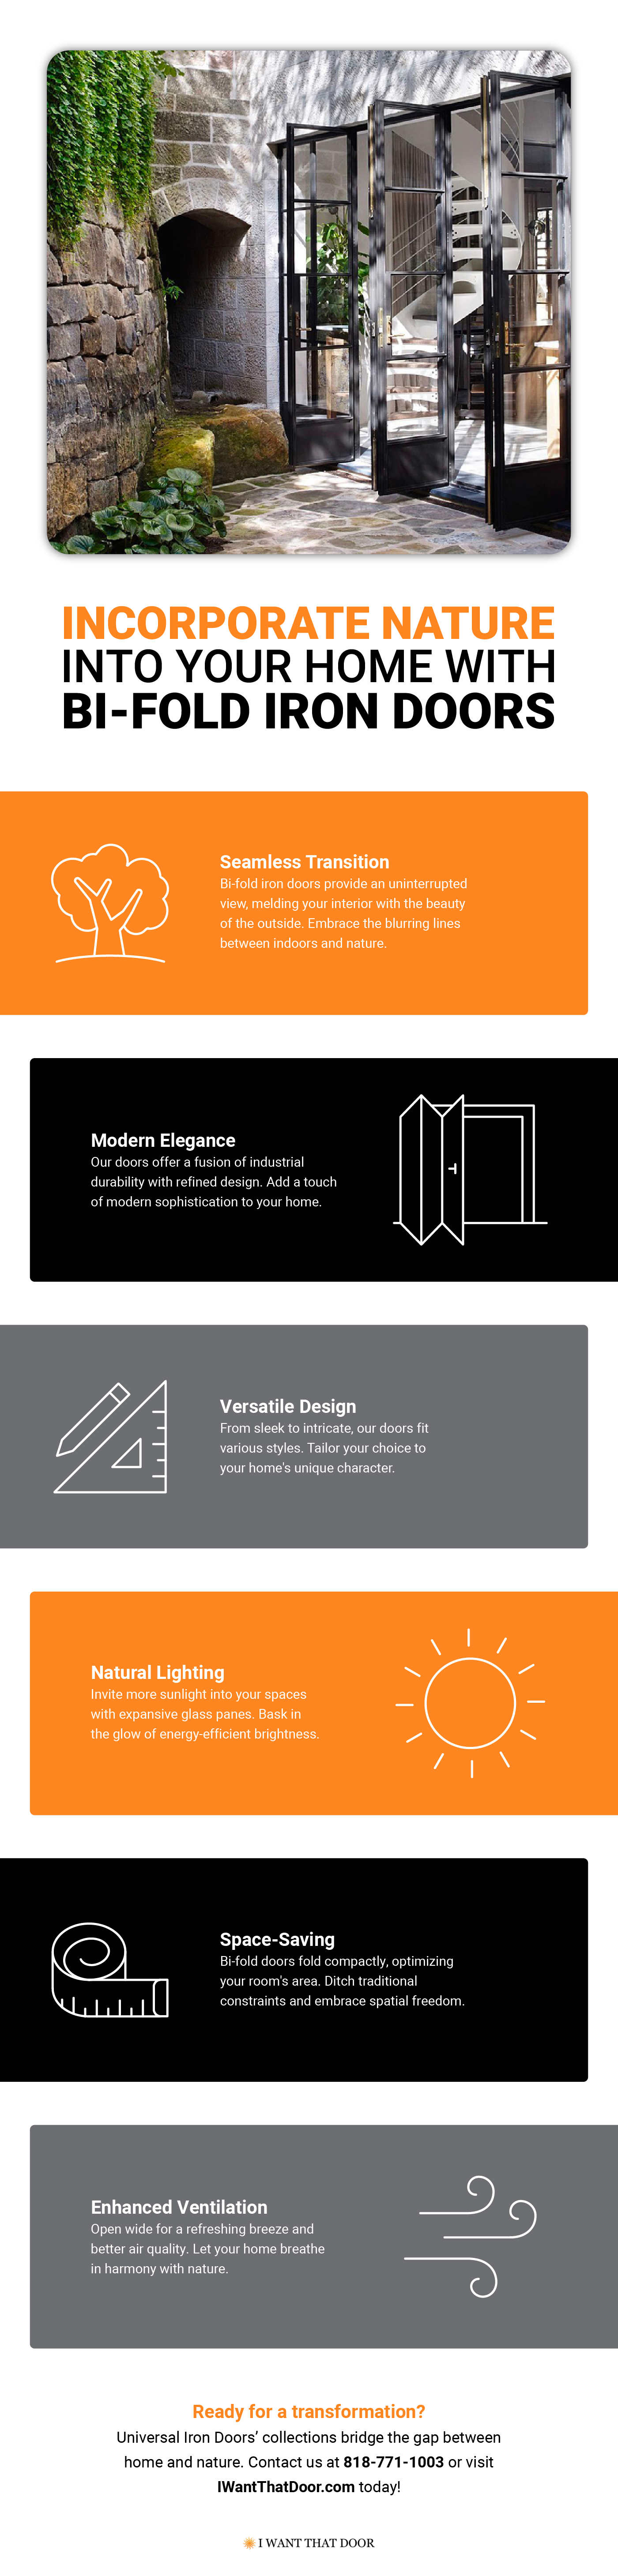 Incorporate Nature Into Your Home With Bi-Fold Iron Doors Infographic